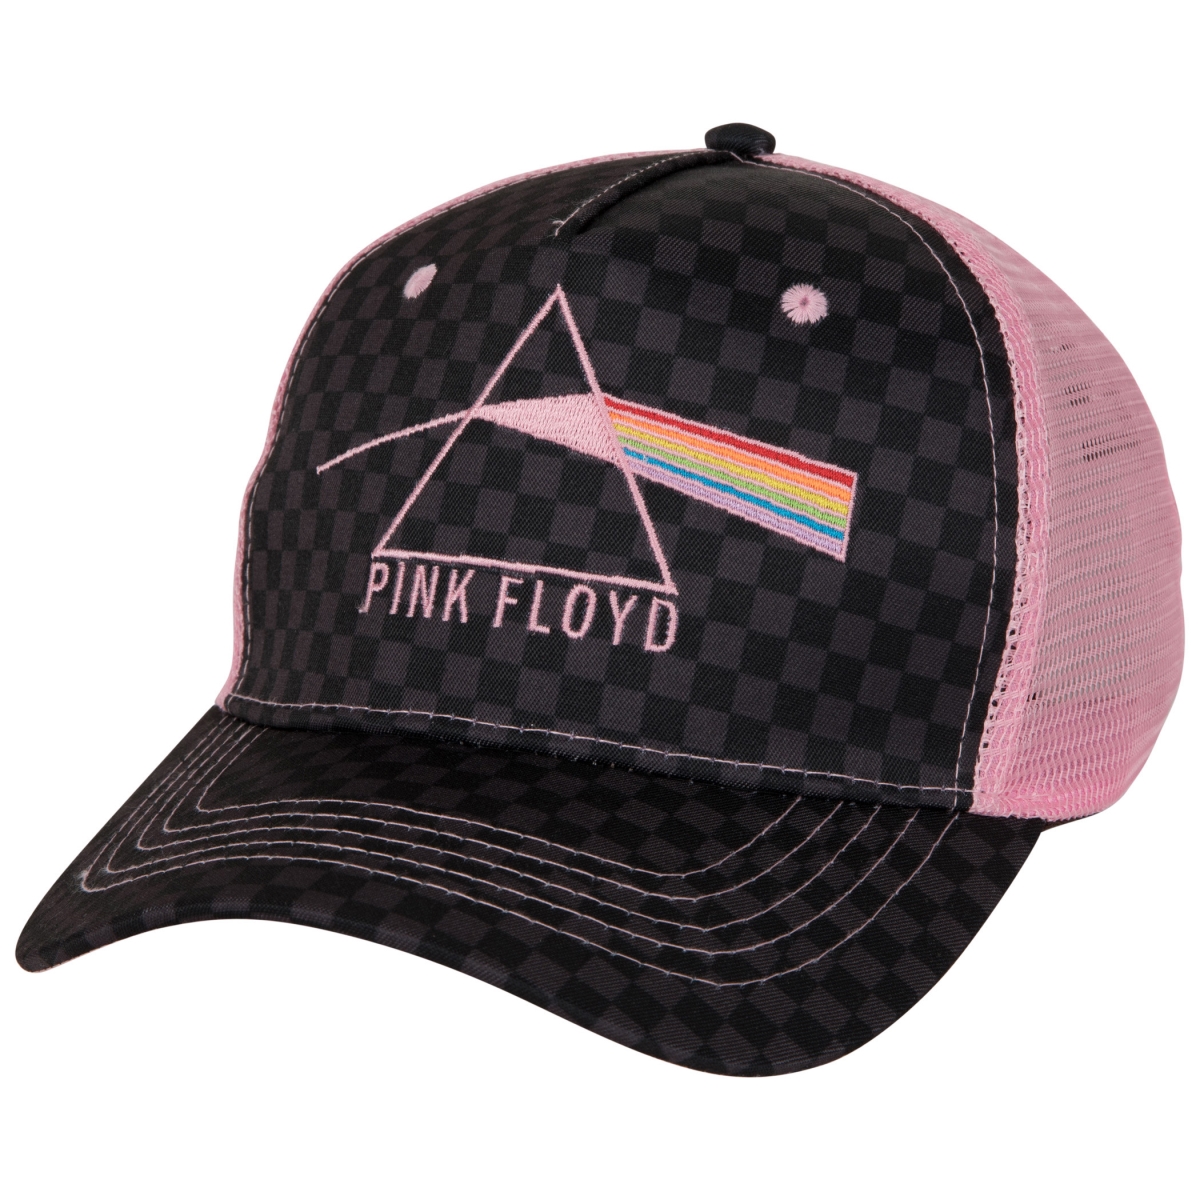 864815 Polyester  The Dark Side of The Moon Snapback Trucker Hat, Black & Pink -  Pink Floyd